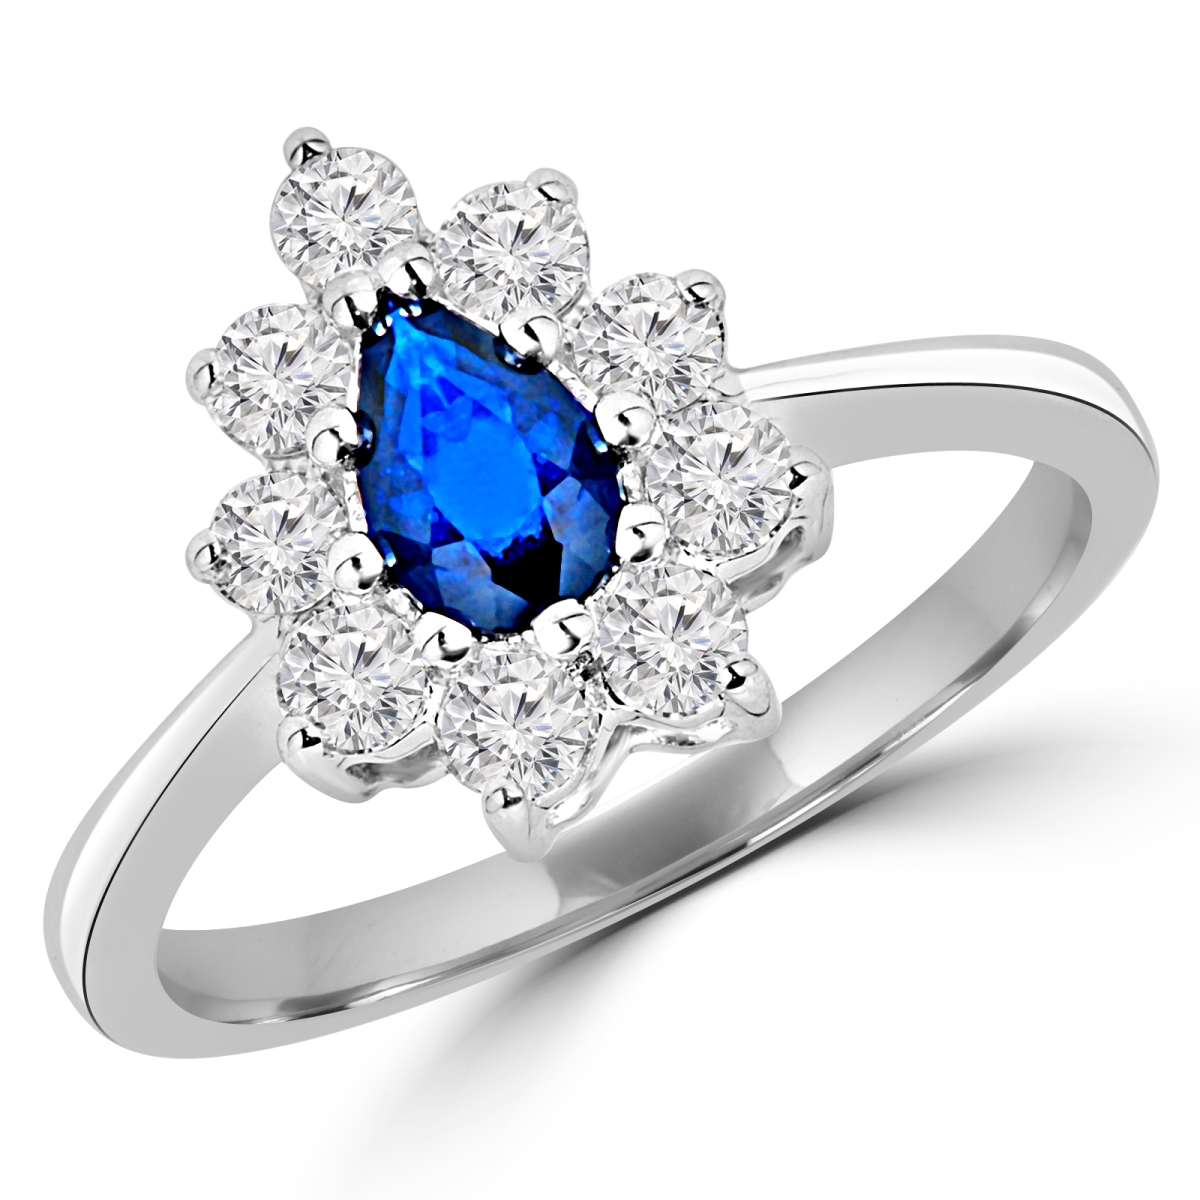 Picture of Majesty Diamonds MD180236-3.5 1 CTW Pear Blue Sapphire Halo Cocktail Ring in 14K White Gold - Size 3.5